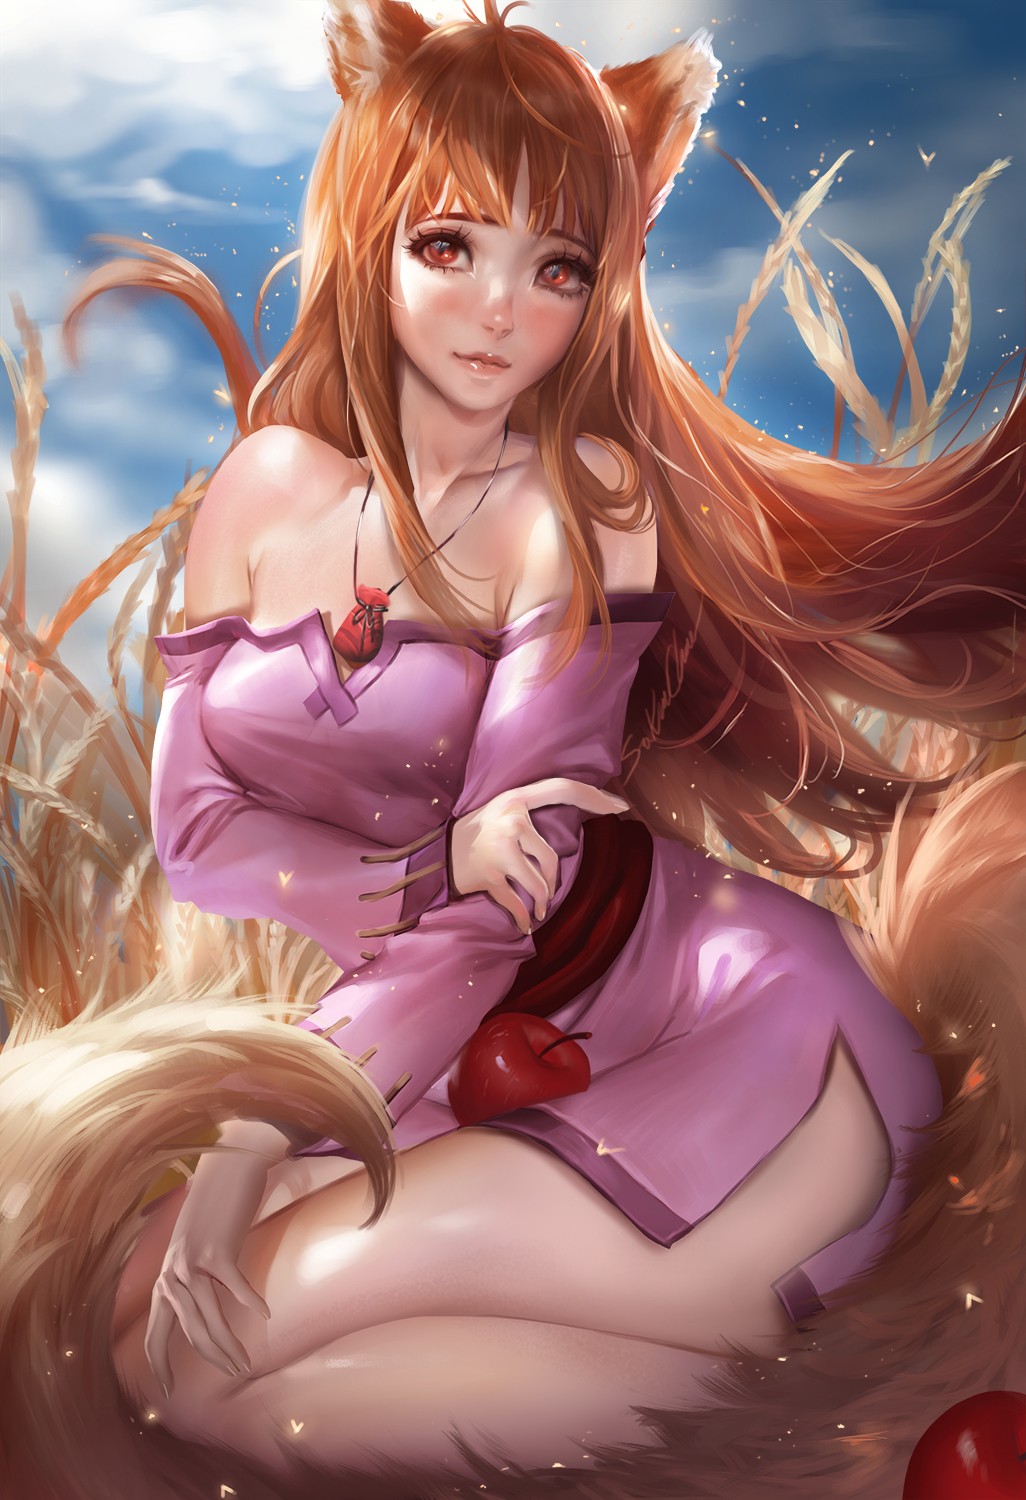 Anime 1026x1500 Sakimichan realistic Holo (Spice and Wolf) Spice and Wolf 2D no bra thighs bangs brunette long hair embarrassed red eyes purple dress cleavage bare shoulders hair blowing in the wind looking at viewer fan art anime girls wolf girls DeviantArt food apples fruit necklace fantasy art artwork fantasy girl